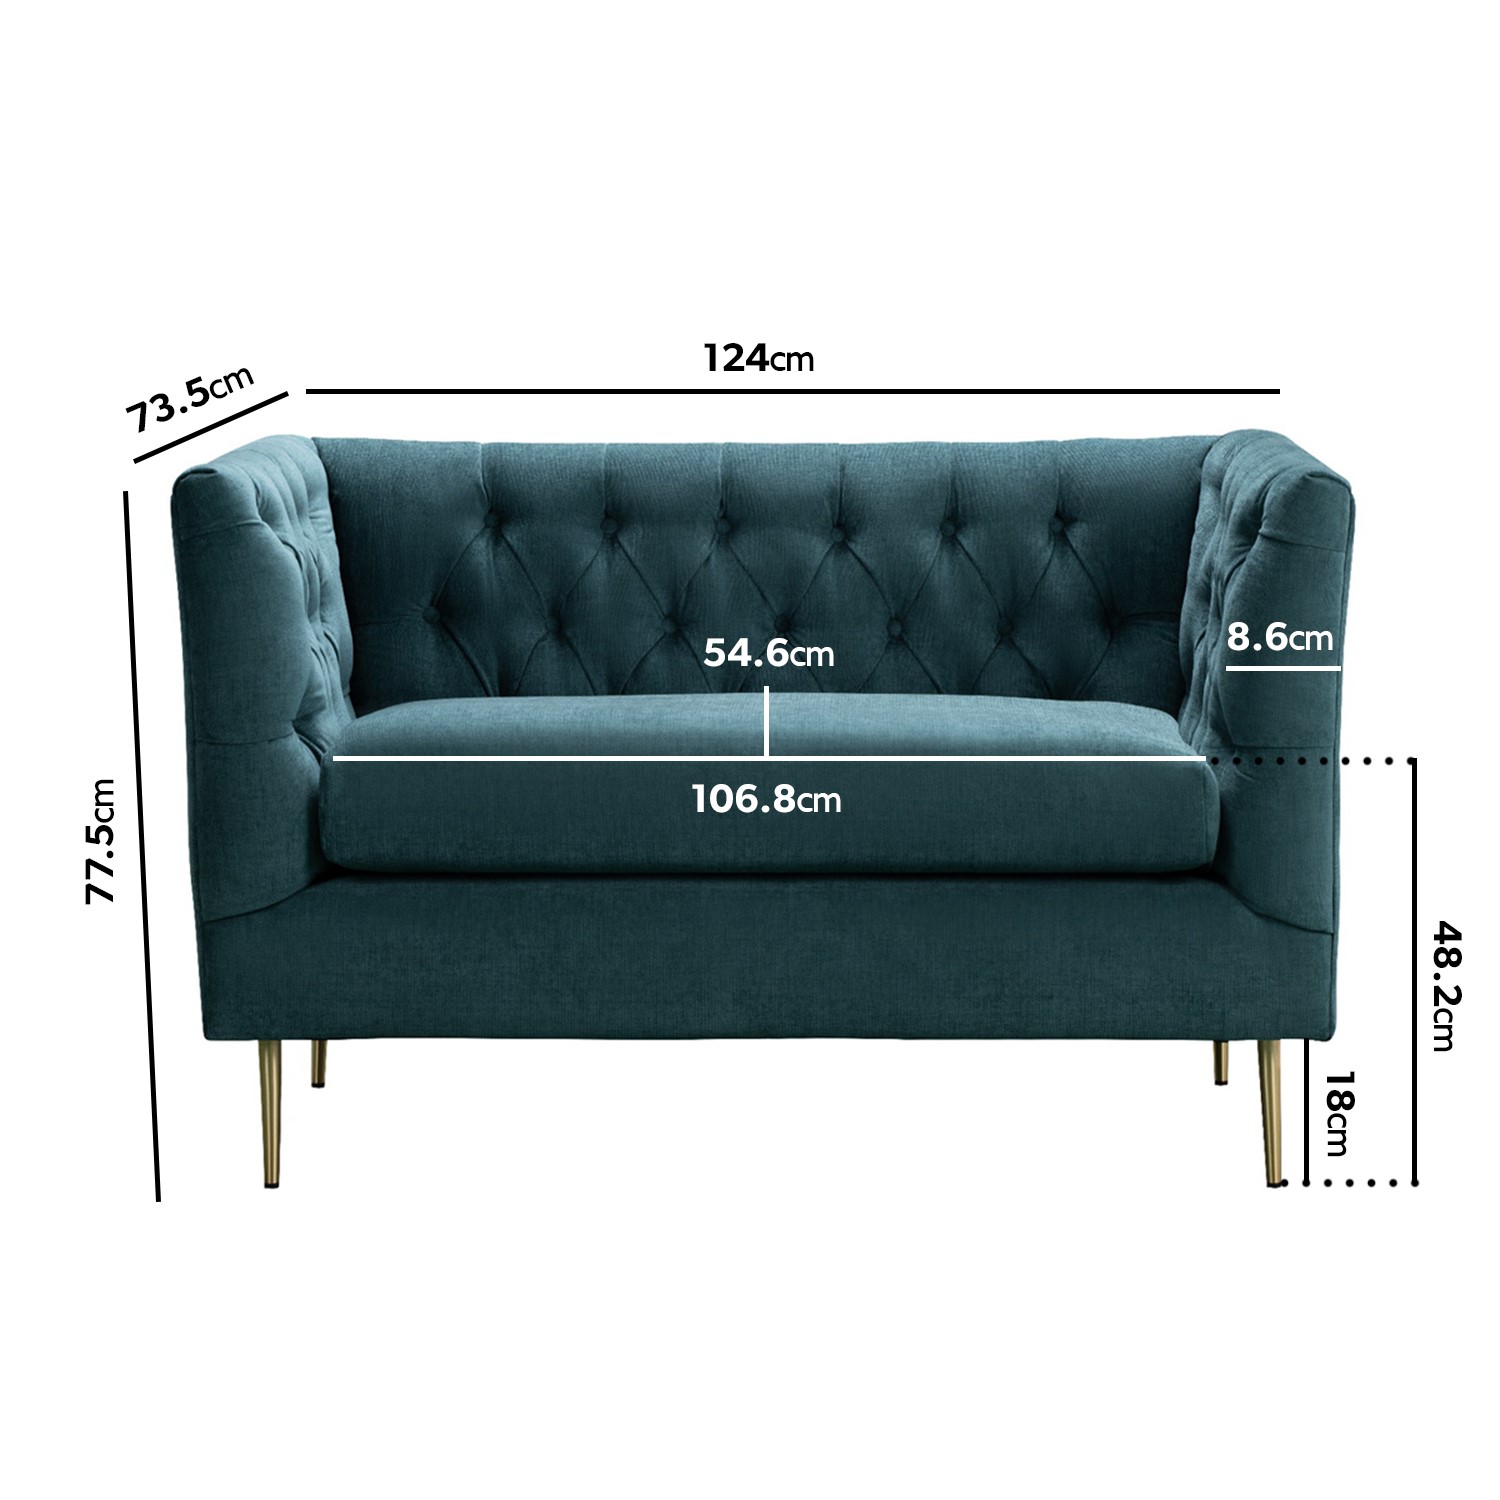 Read more about Teal fabric chesterfield loveseat celeste